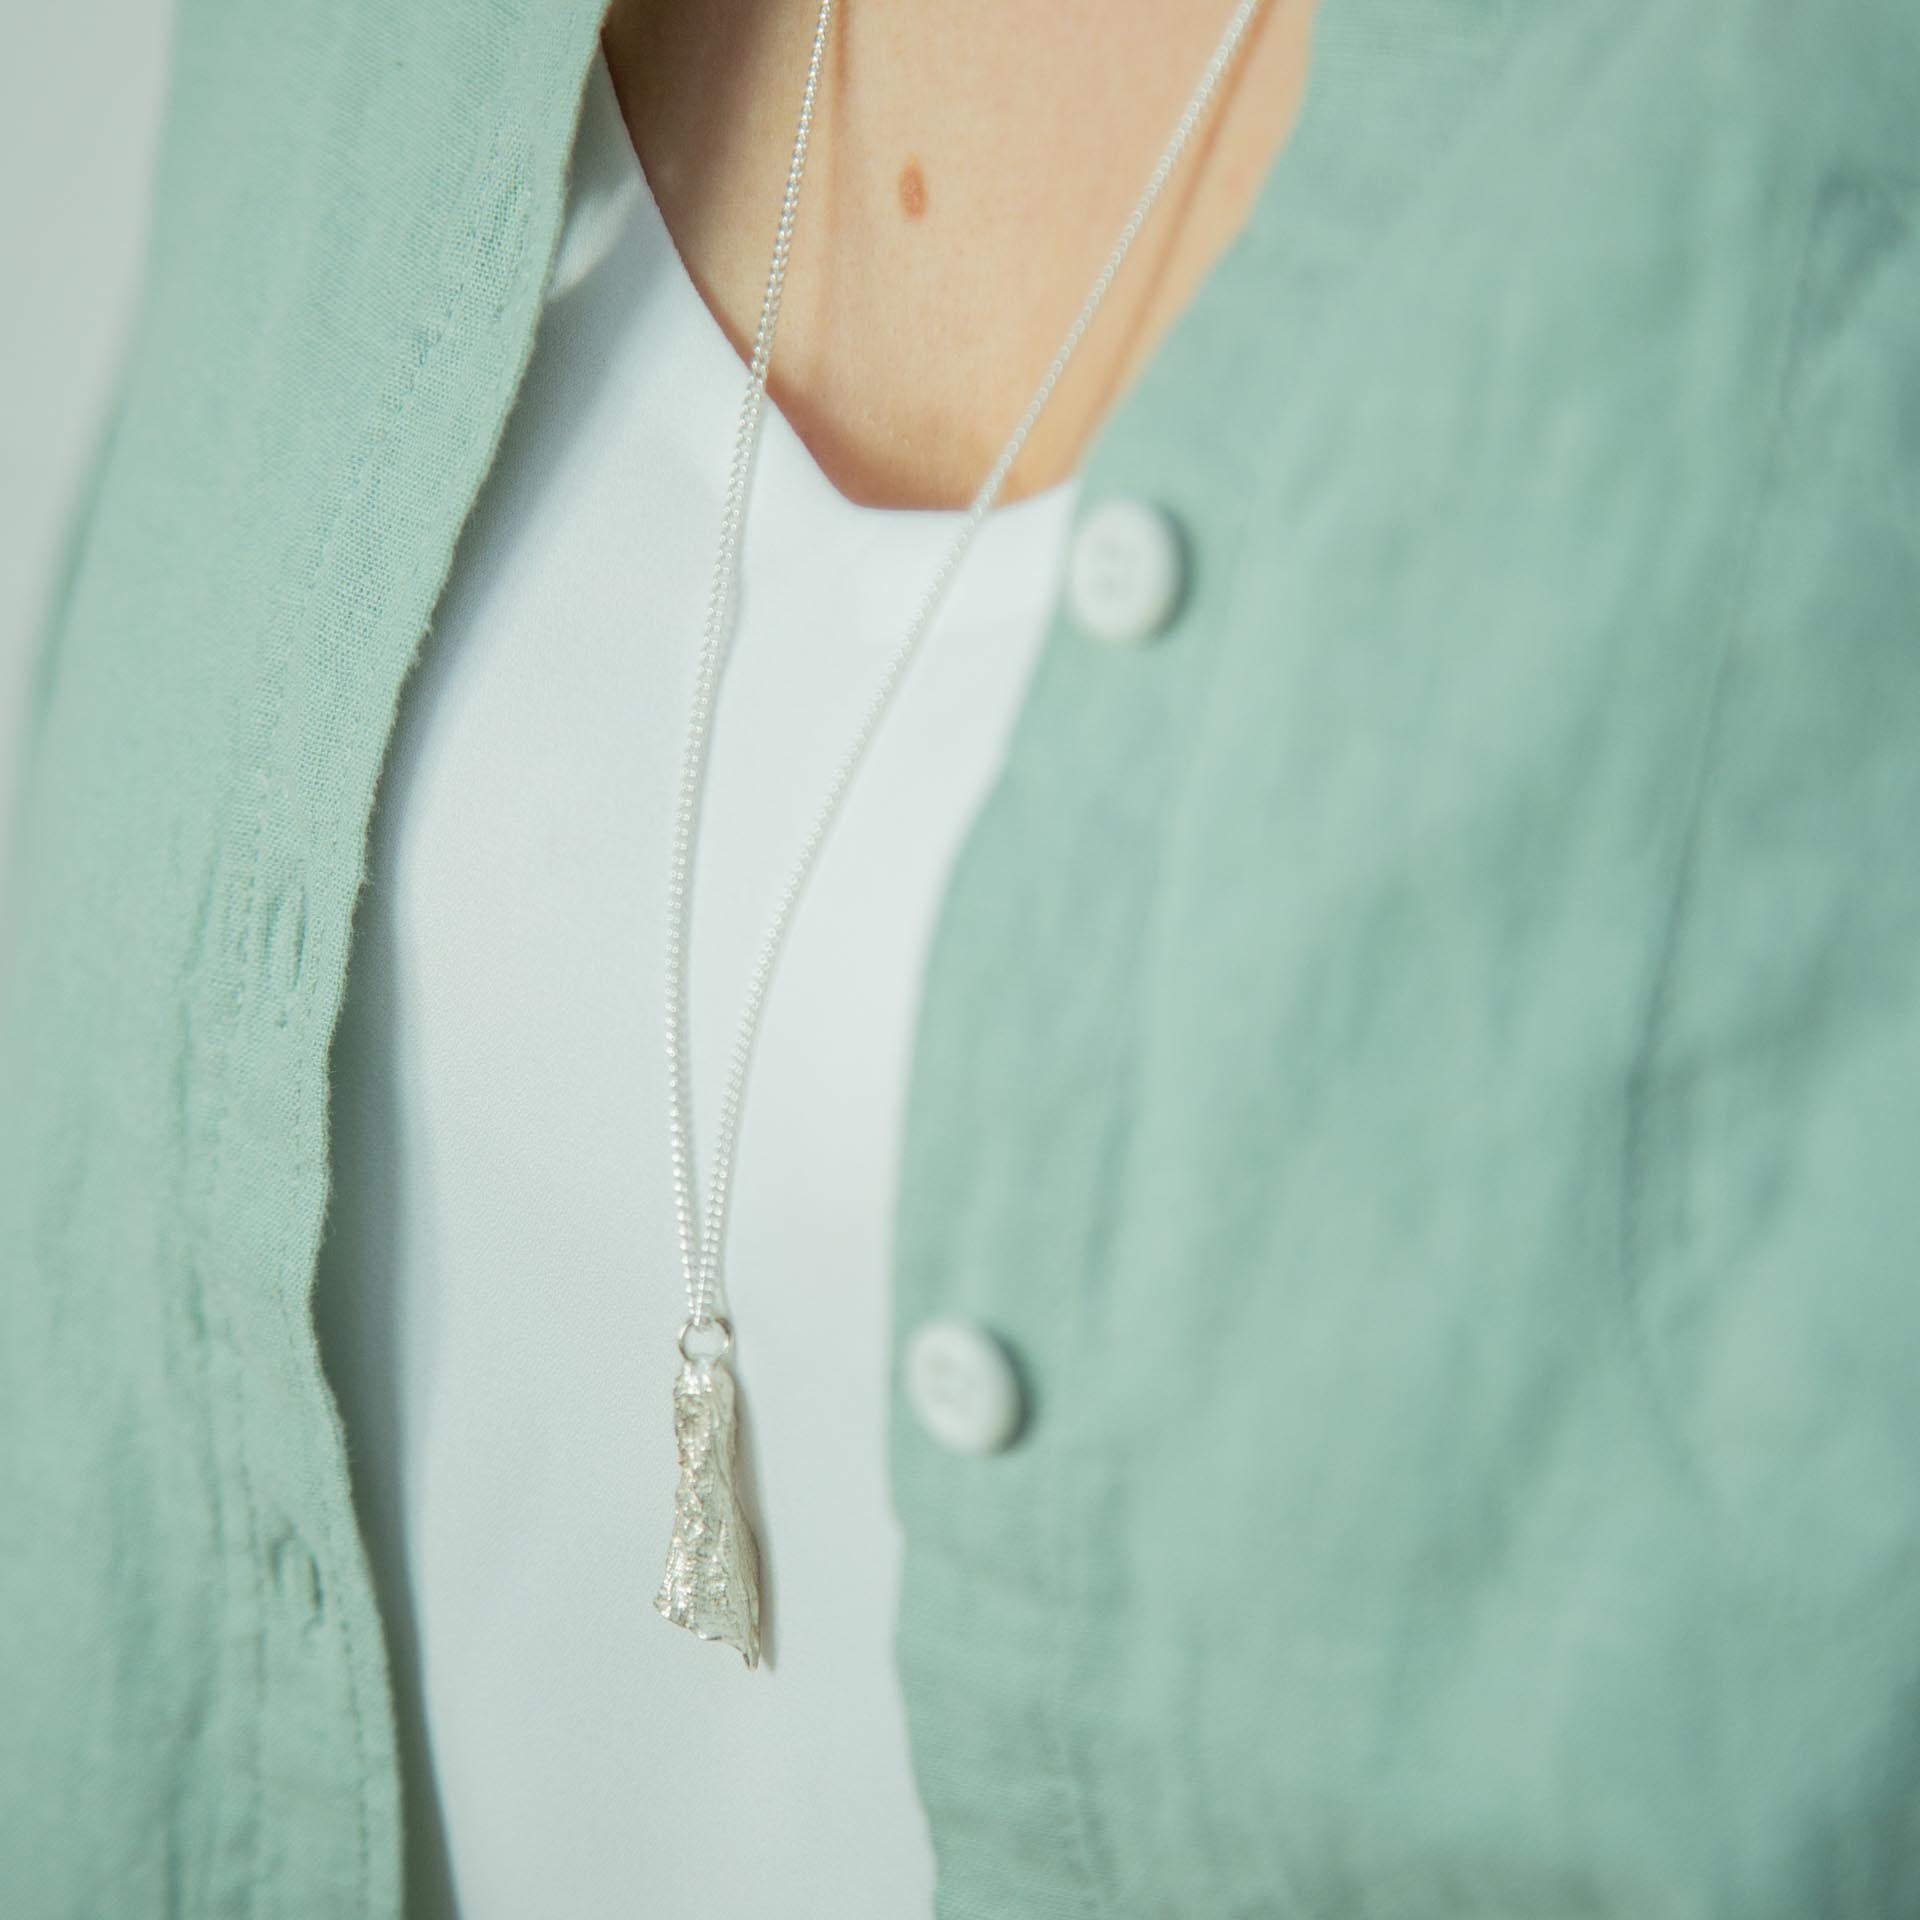 silver foxglove pendant necklace on model hanging above a green shirt and white t-shirt 